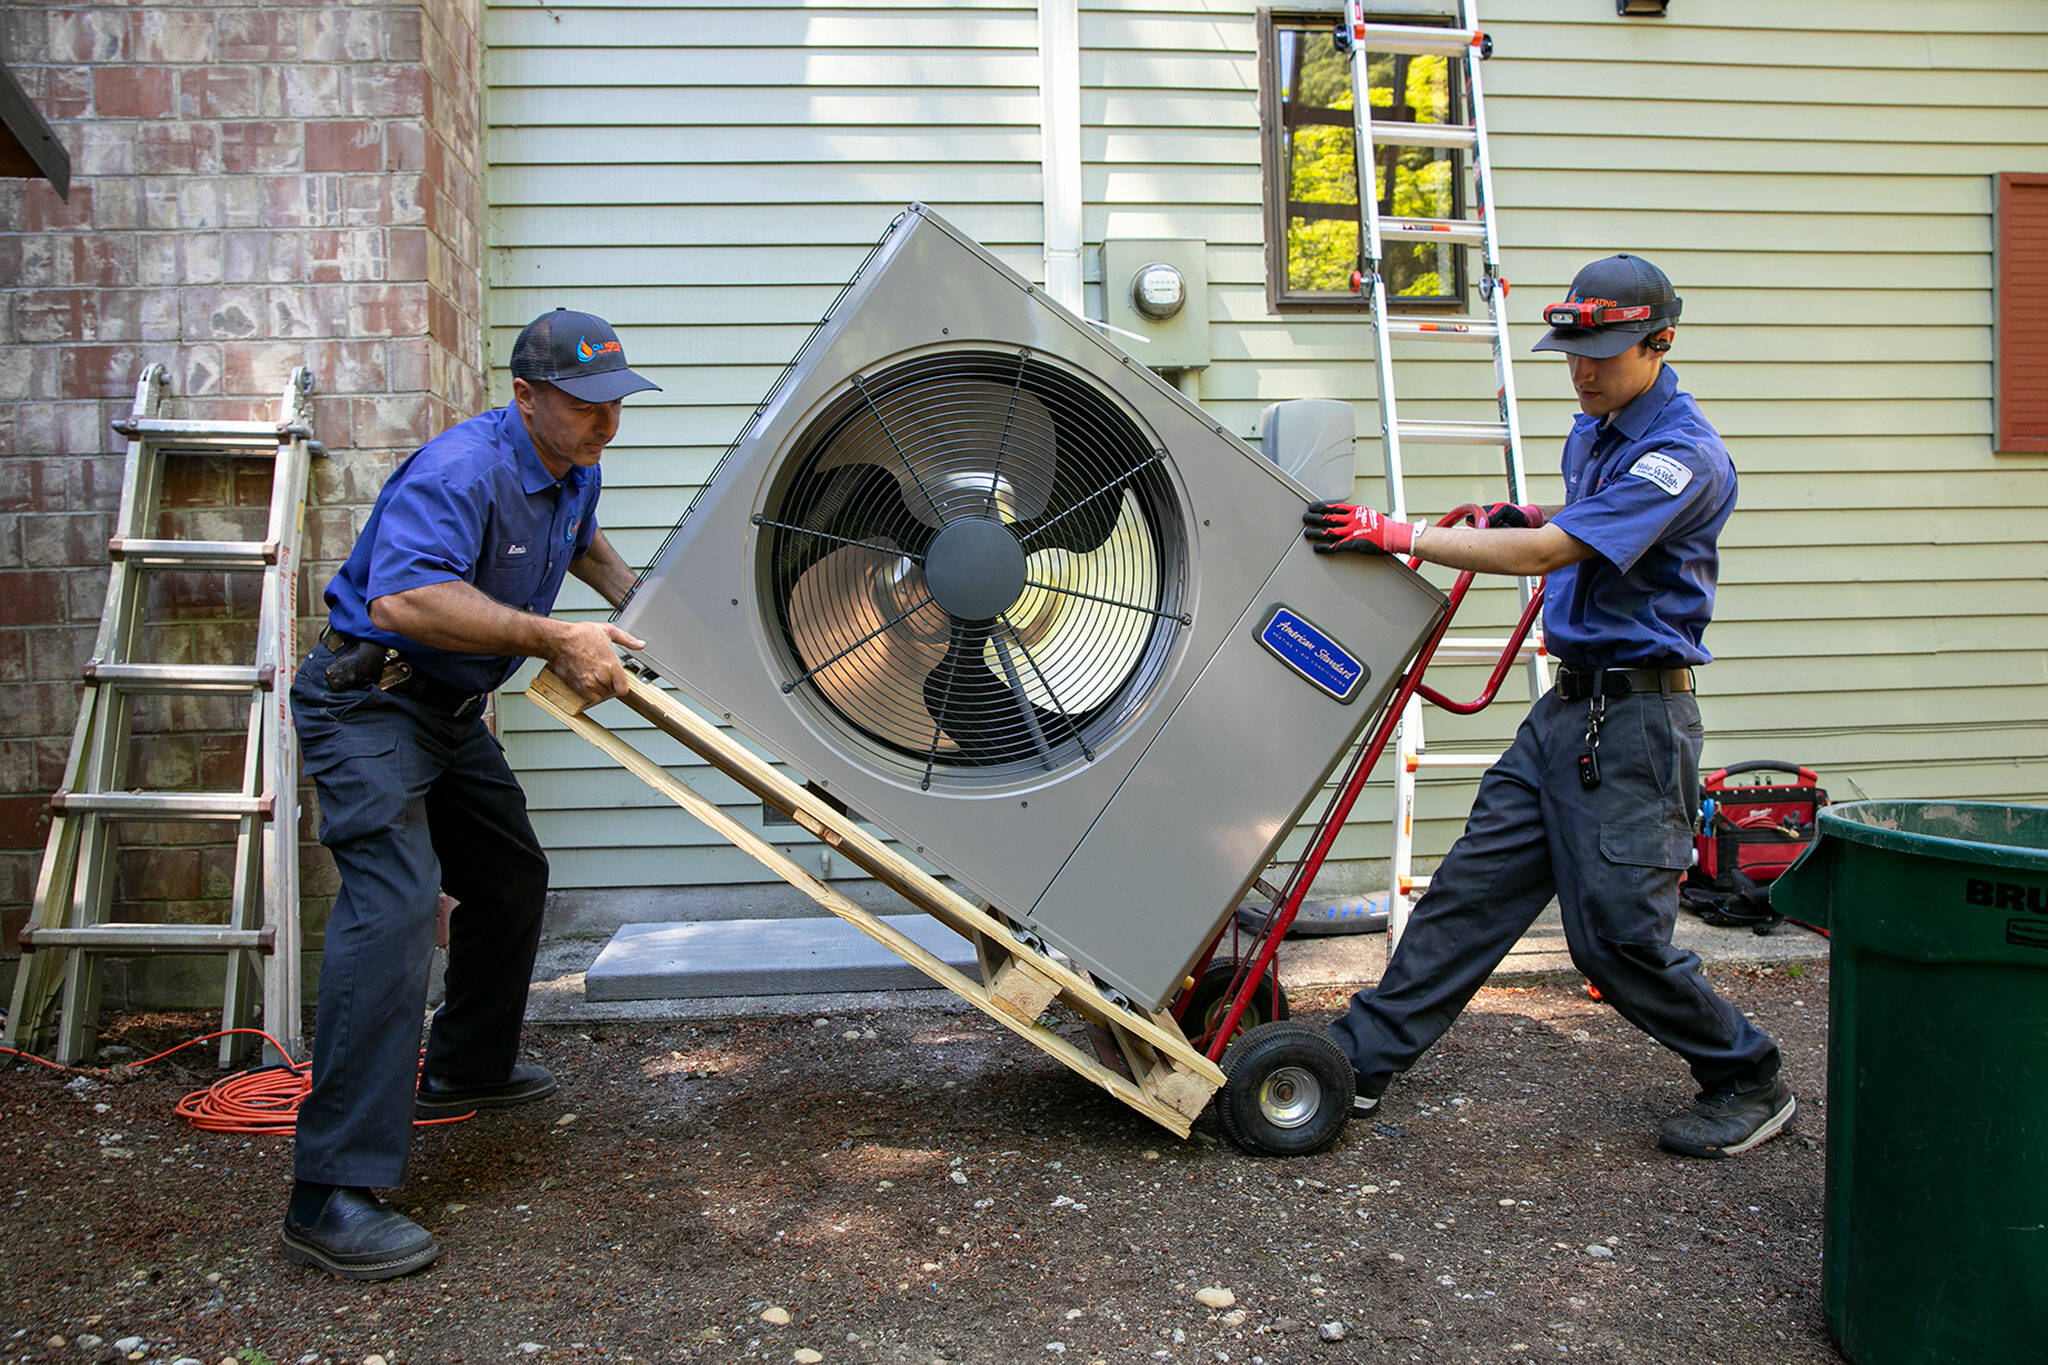 Remis Jankauskas, left, and Trent Pickford of CM Heating move a heat pump into place while working on a home’s HVAC system on Friday, in Woodinville. (Ryan Berry / The Herald)